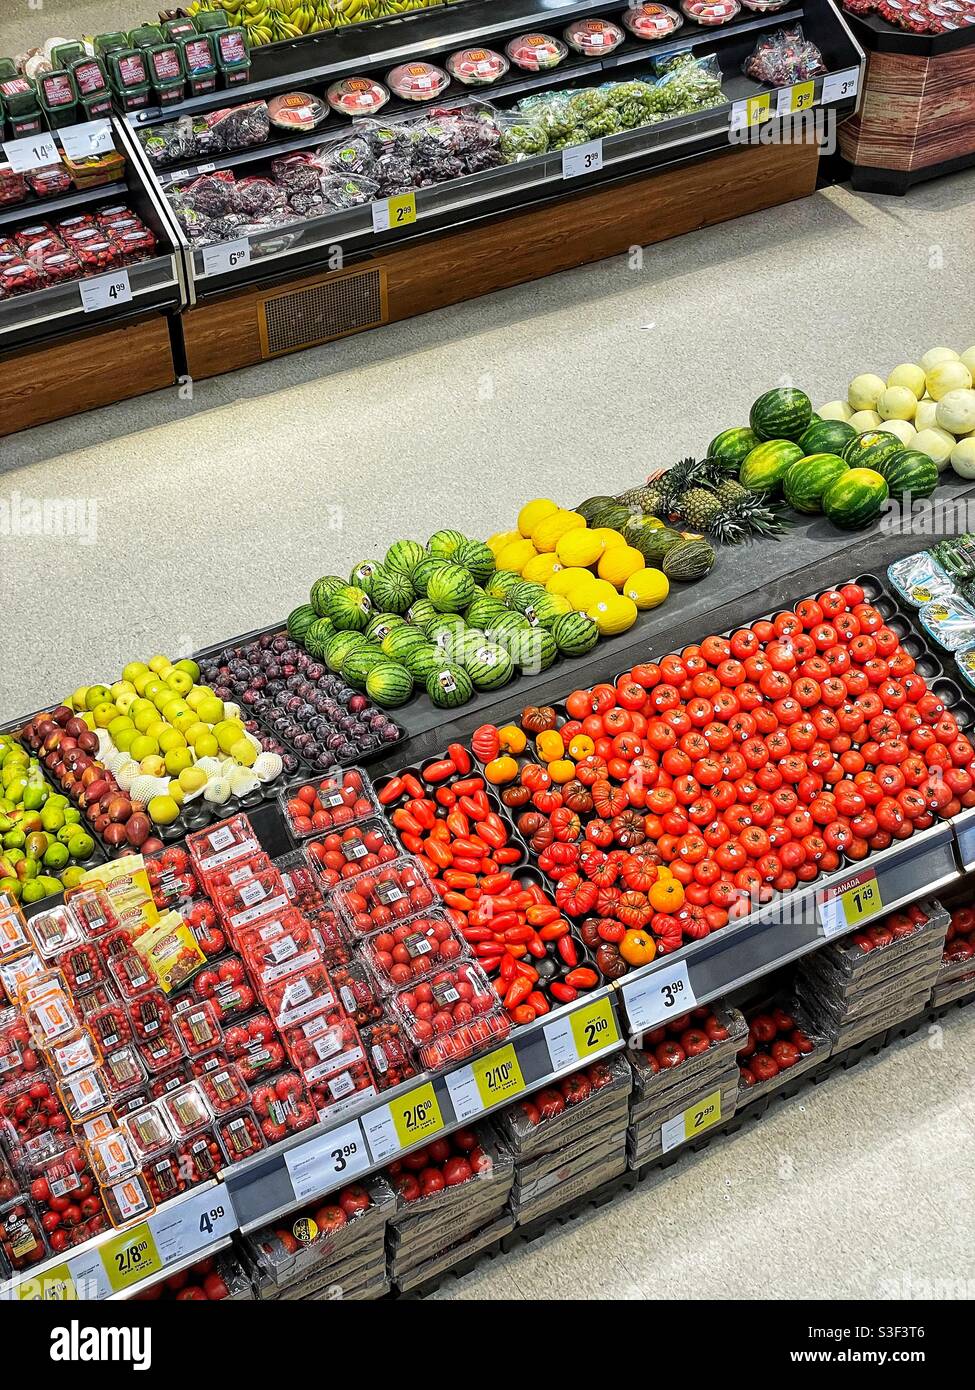 Grocery store produce section. Stock Photo